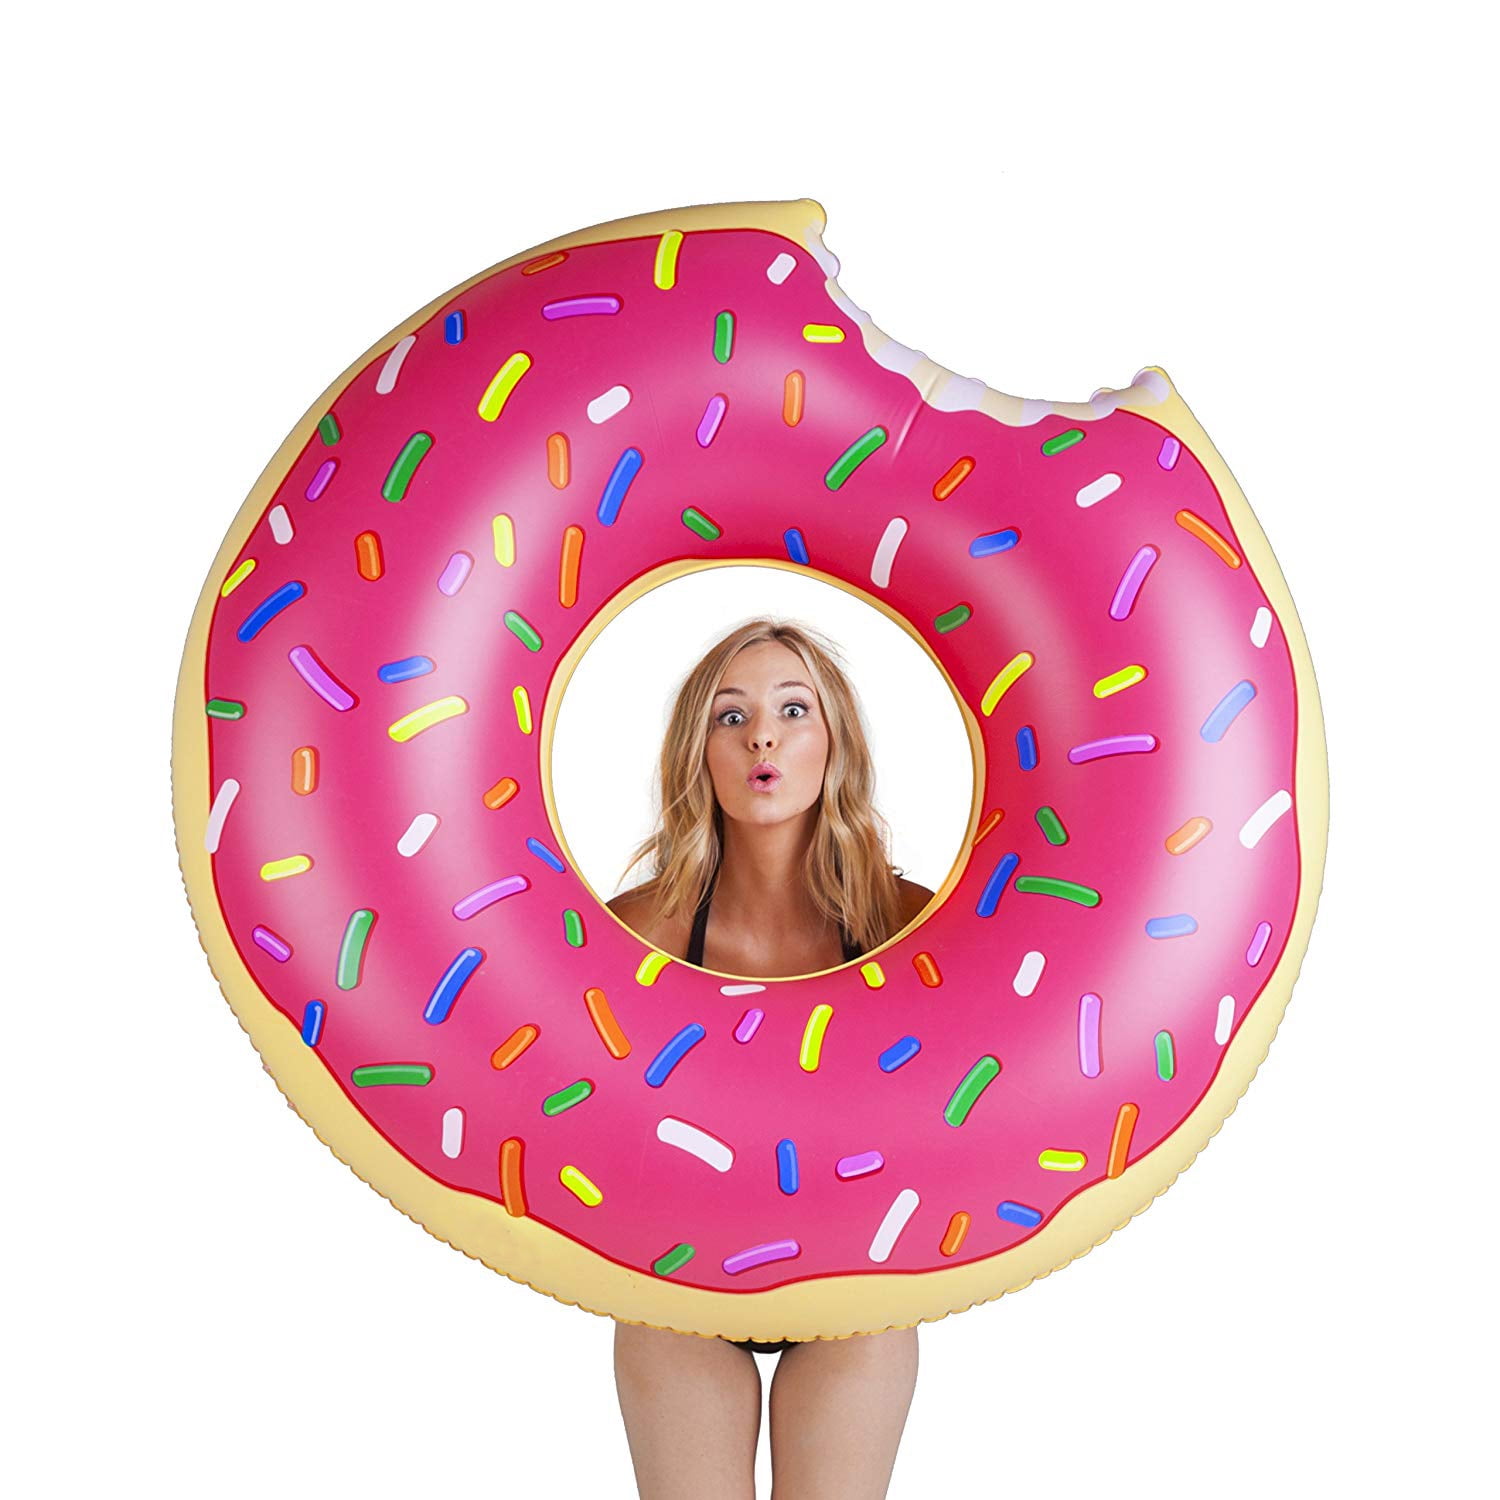 NEW  INTEX INFLATABLE DONUT NUTS TUBE POOL FLOAT LOUNGER SWIM BEACH RING 